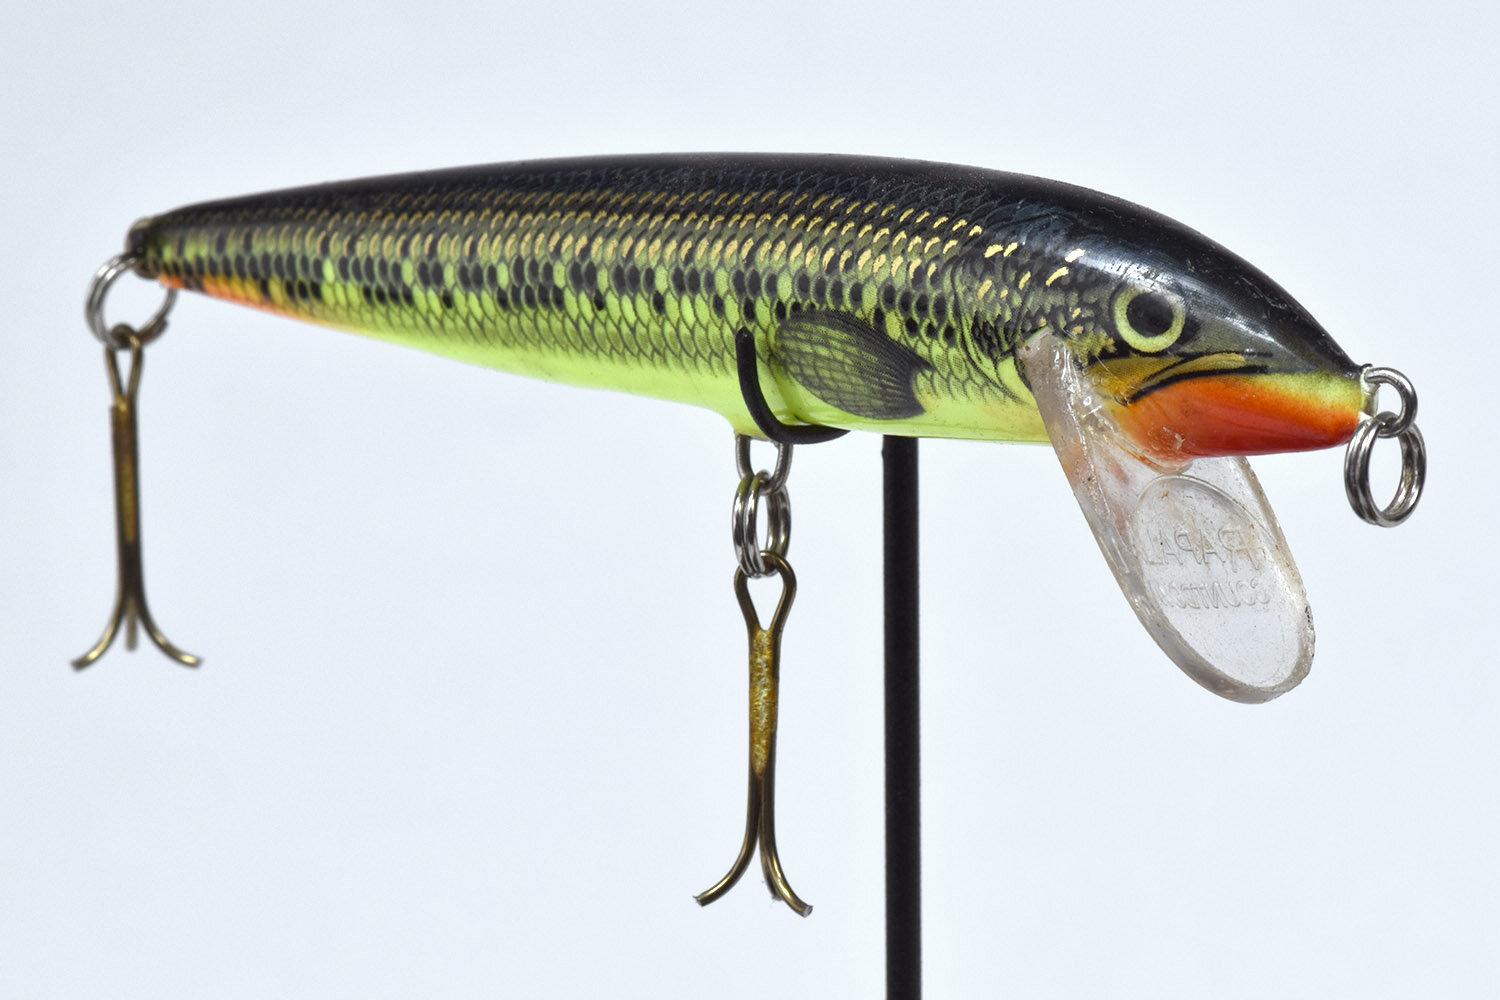 Machine-Made Group of Seven Freshwater Fishing Lures Collected from Lake Tahoe California